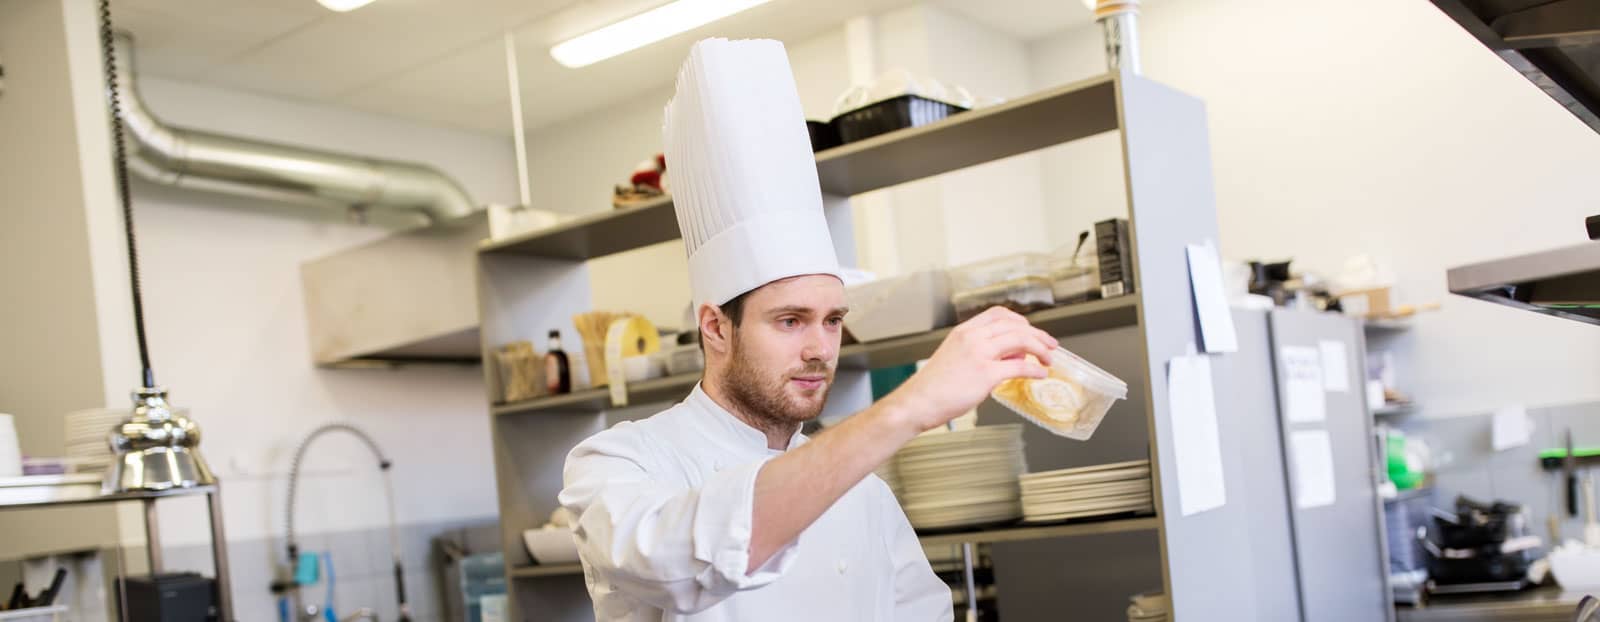 Restaurant chef lifts container of food to verify quantity